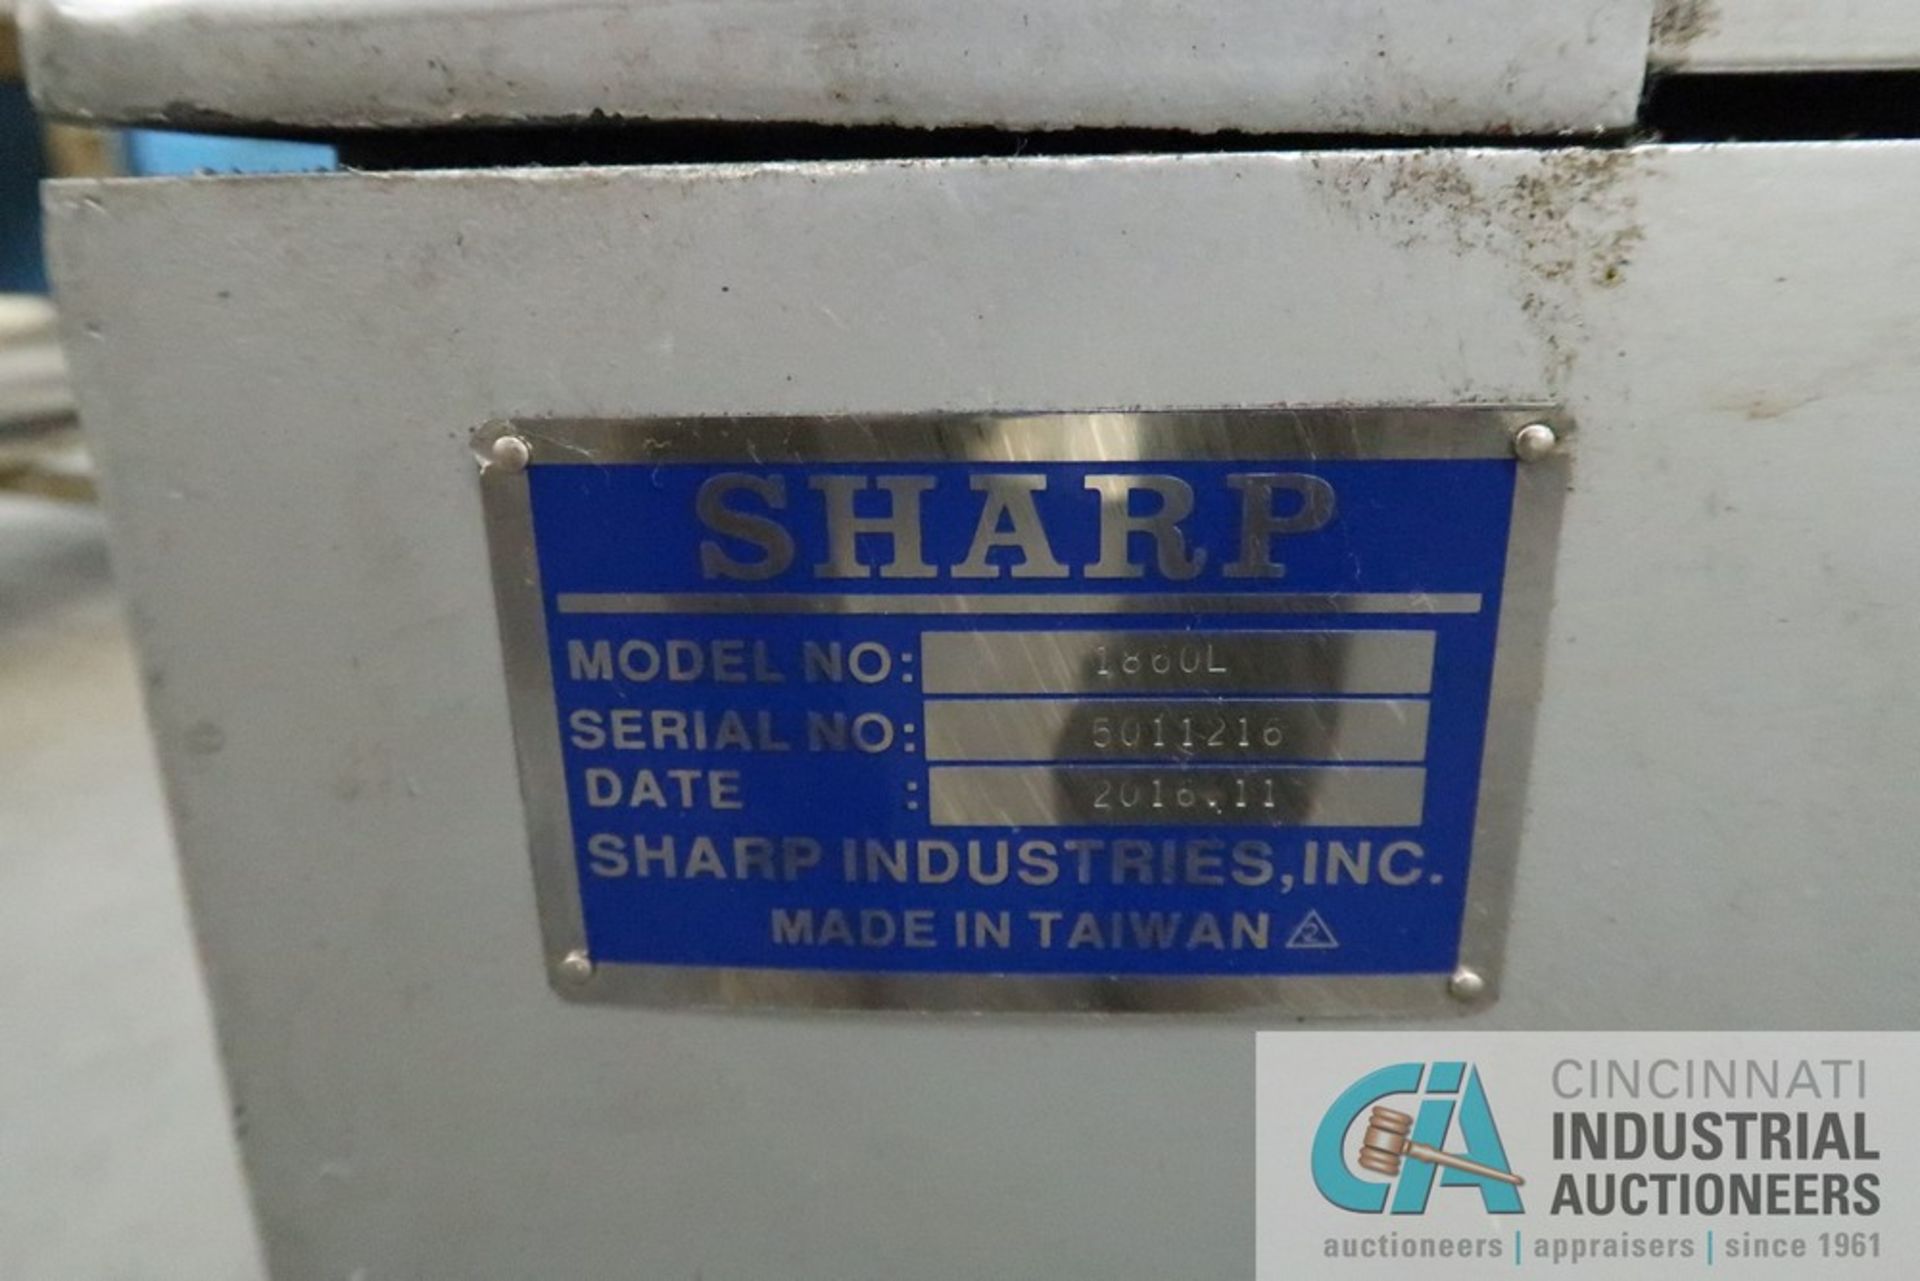 18" X 60" SHARP MODEL 1860L ENGINE LATHE; S/N 5011216, 3" SPINDLE HOLE, 15" 4-JAW CHUCK, - Image 4 of 10